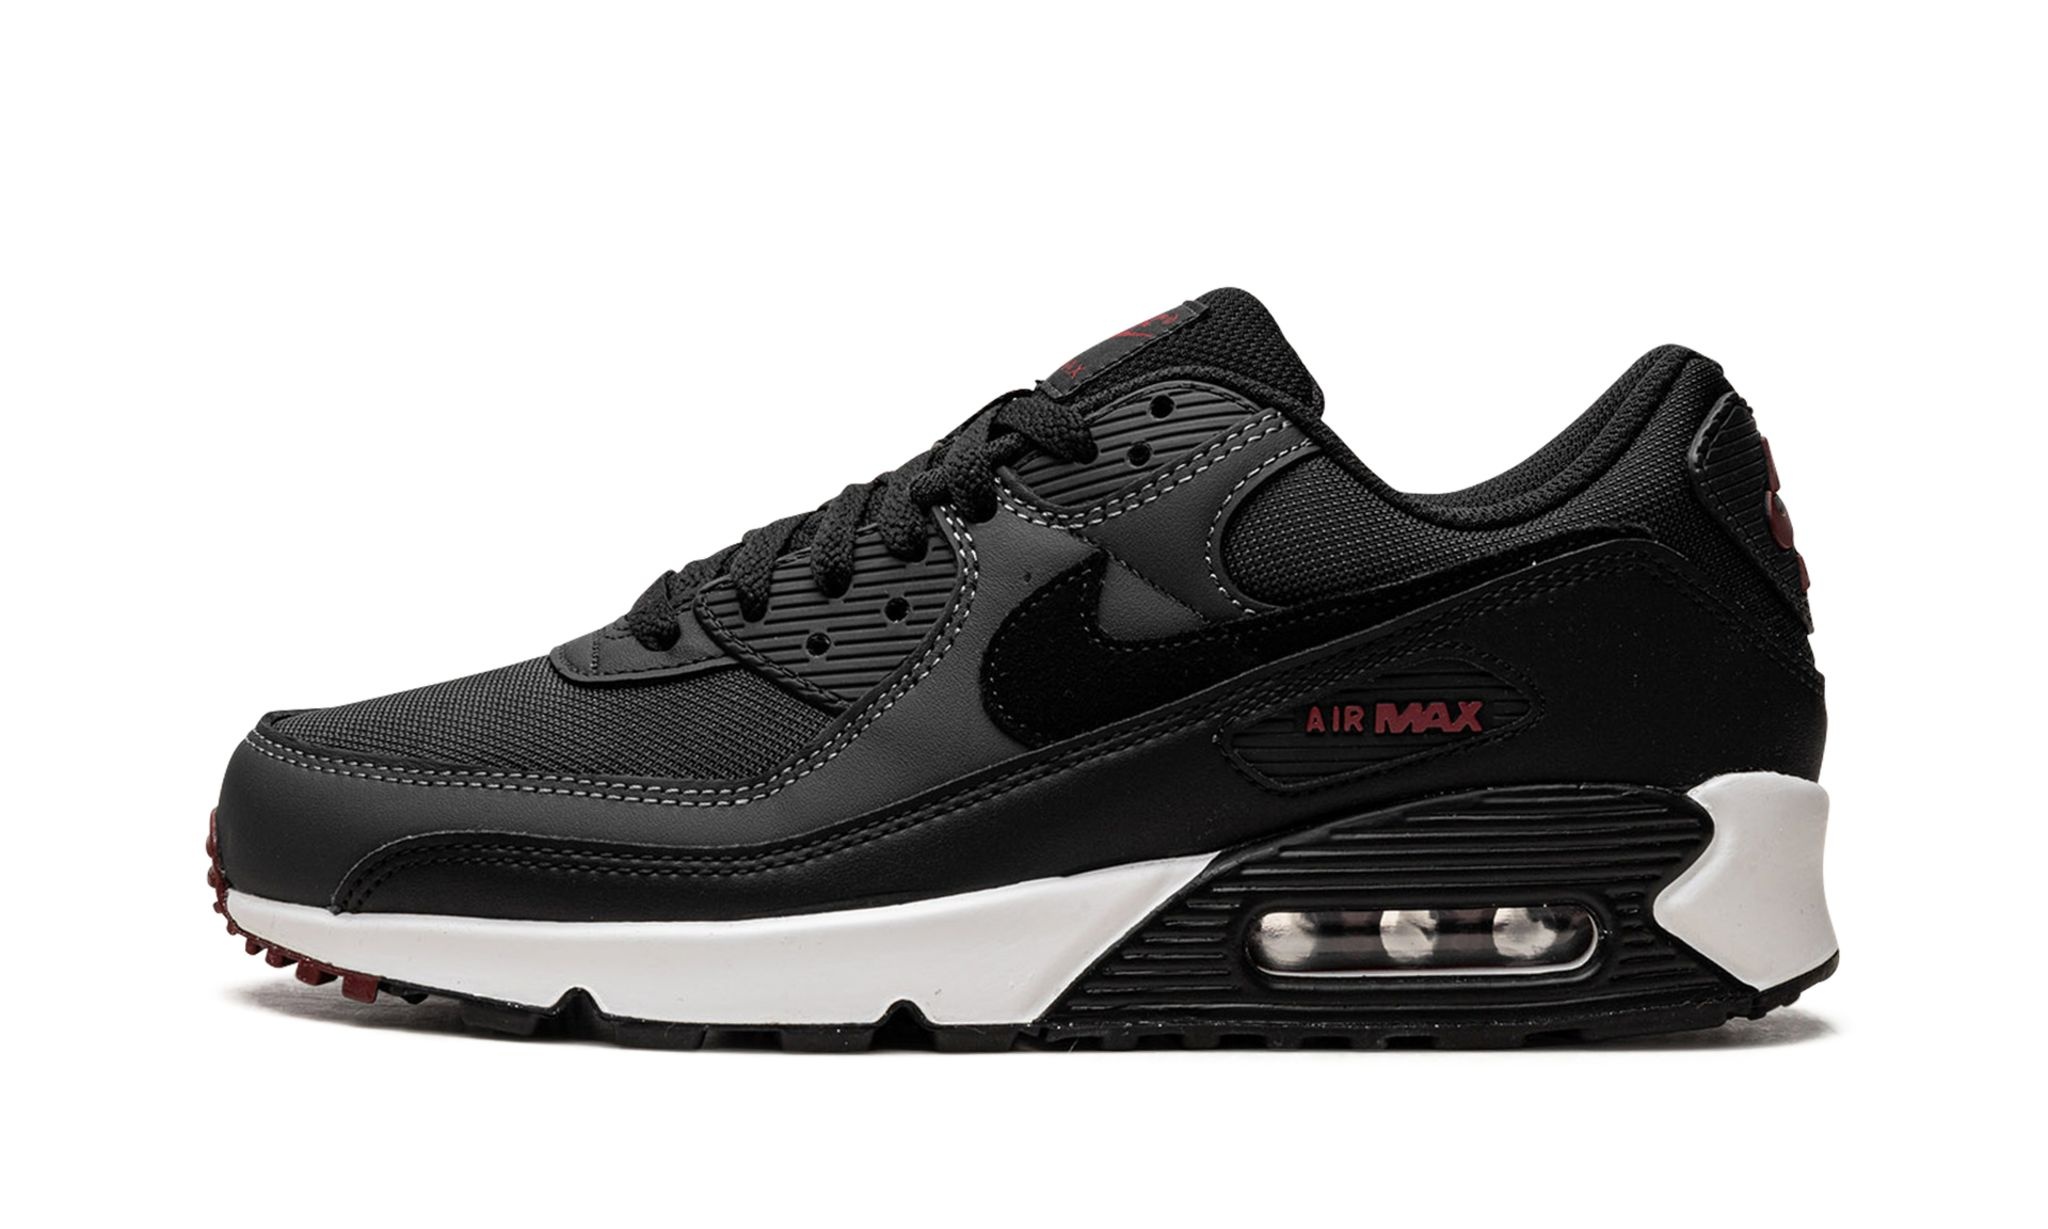 Air Max 90 "Anthracite Team Red" - 1